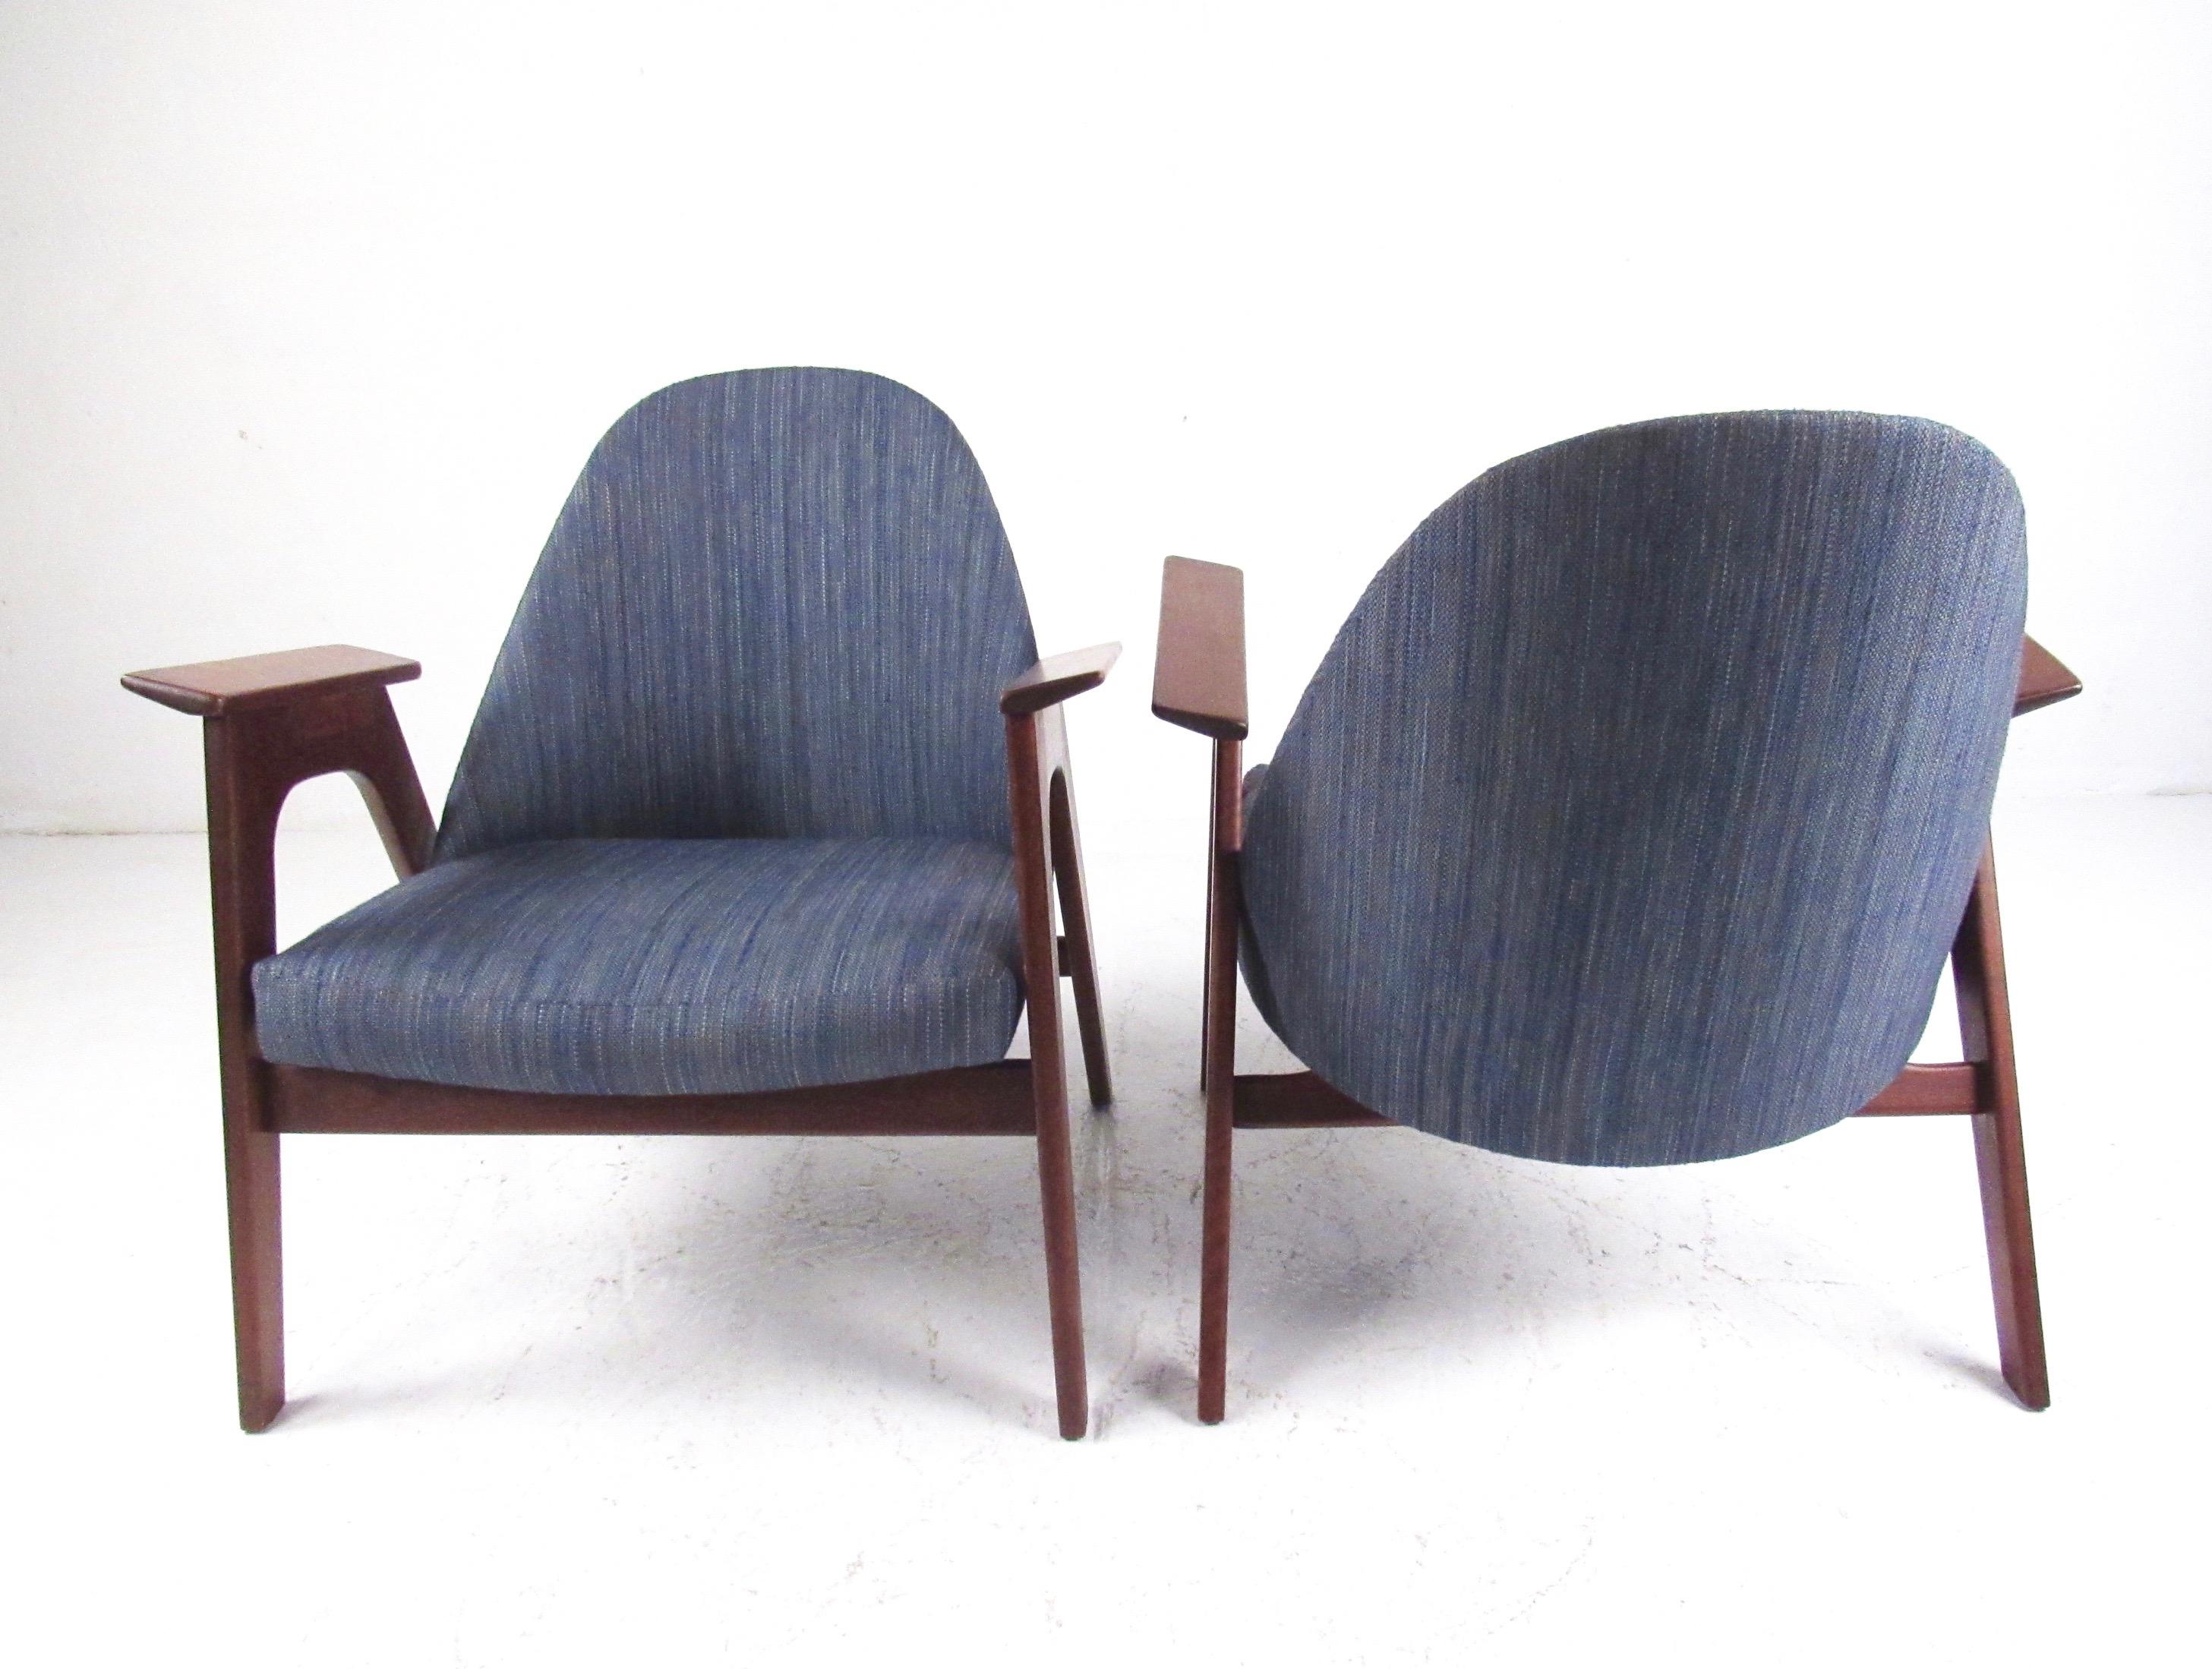 Mid-20th Century Pair of Scandinavian Modern Lounge Chairs After Kofod-Larsen For Sale